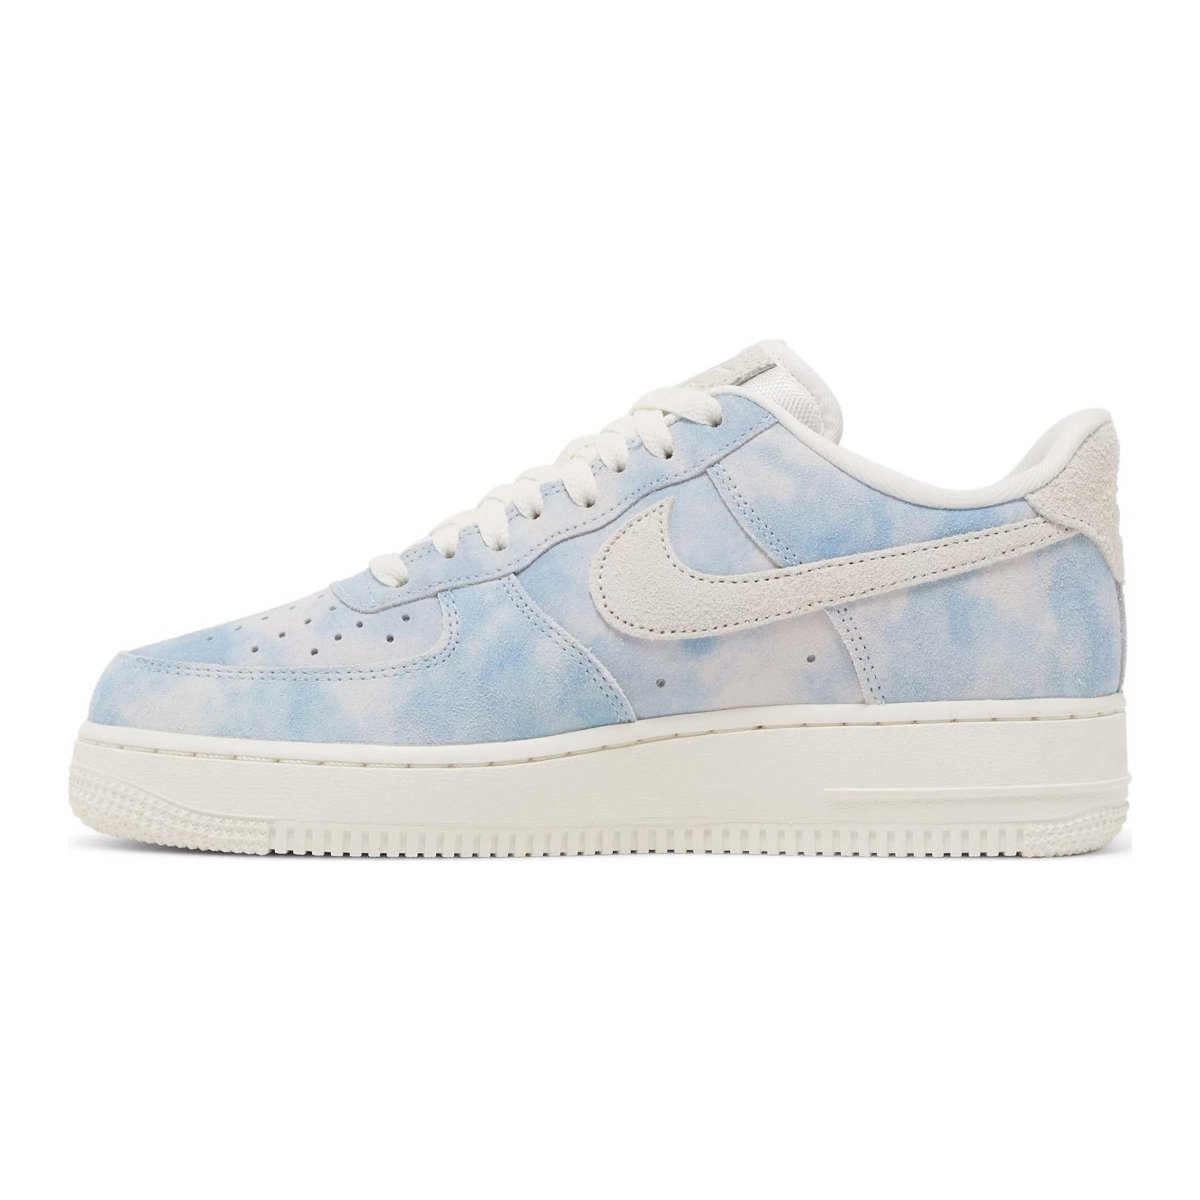 Nike Women's Air Force 1 '07 Clouds - 10026186 - West NYC